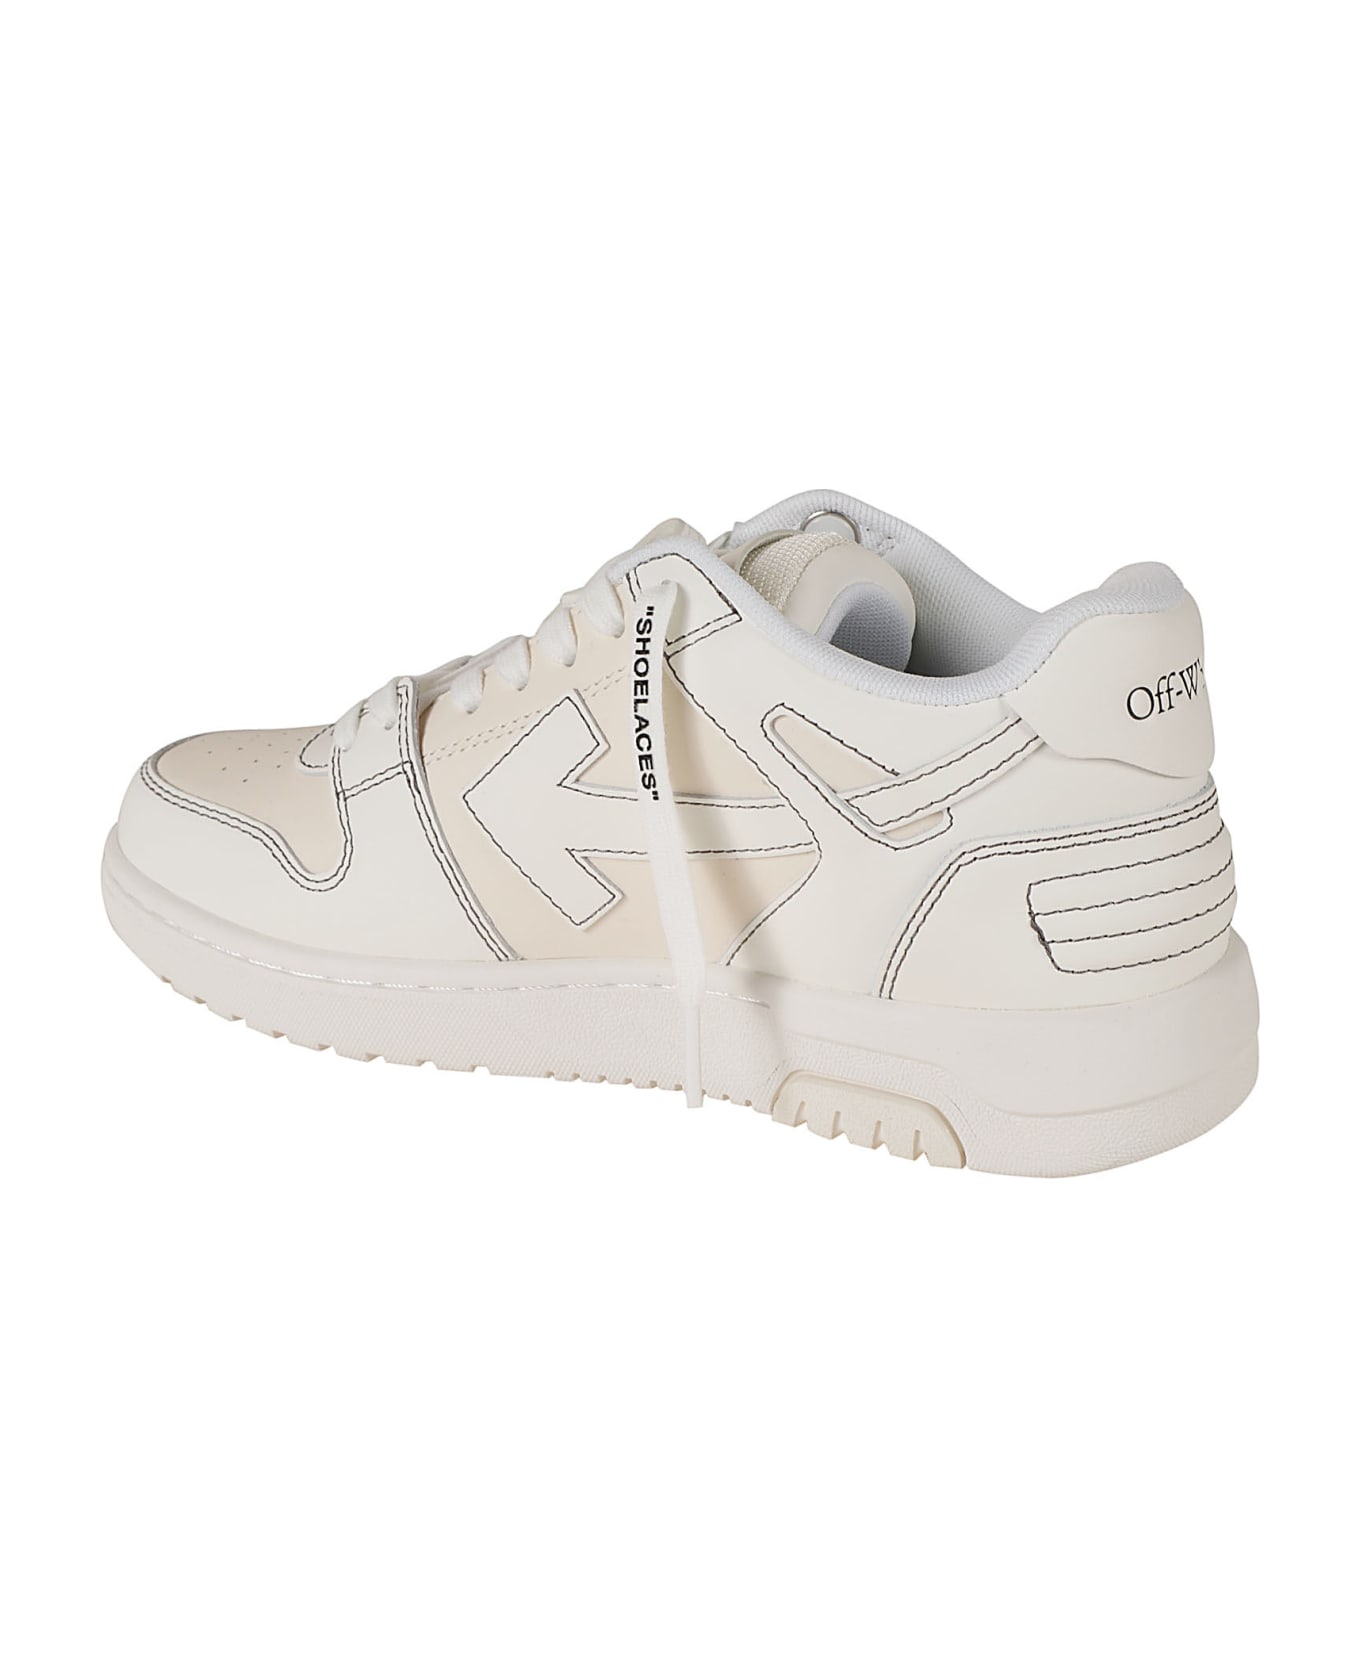 Off-White Out Of Office Sneakers - Cream/White スニーカー